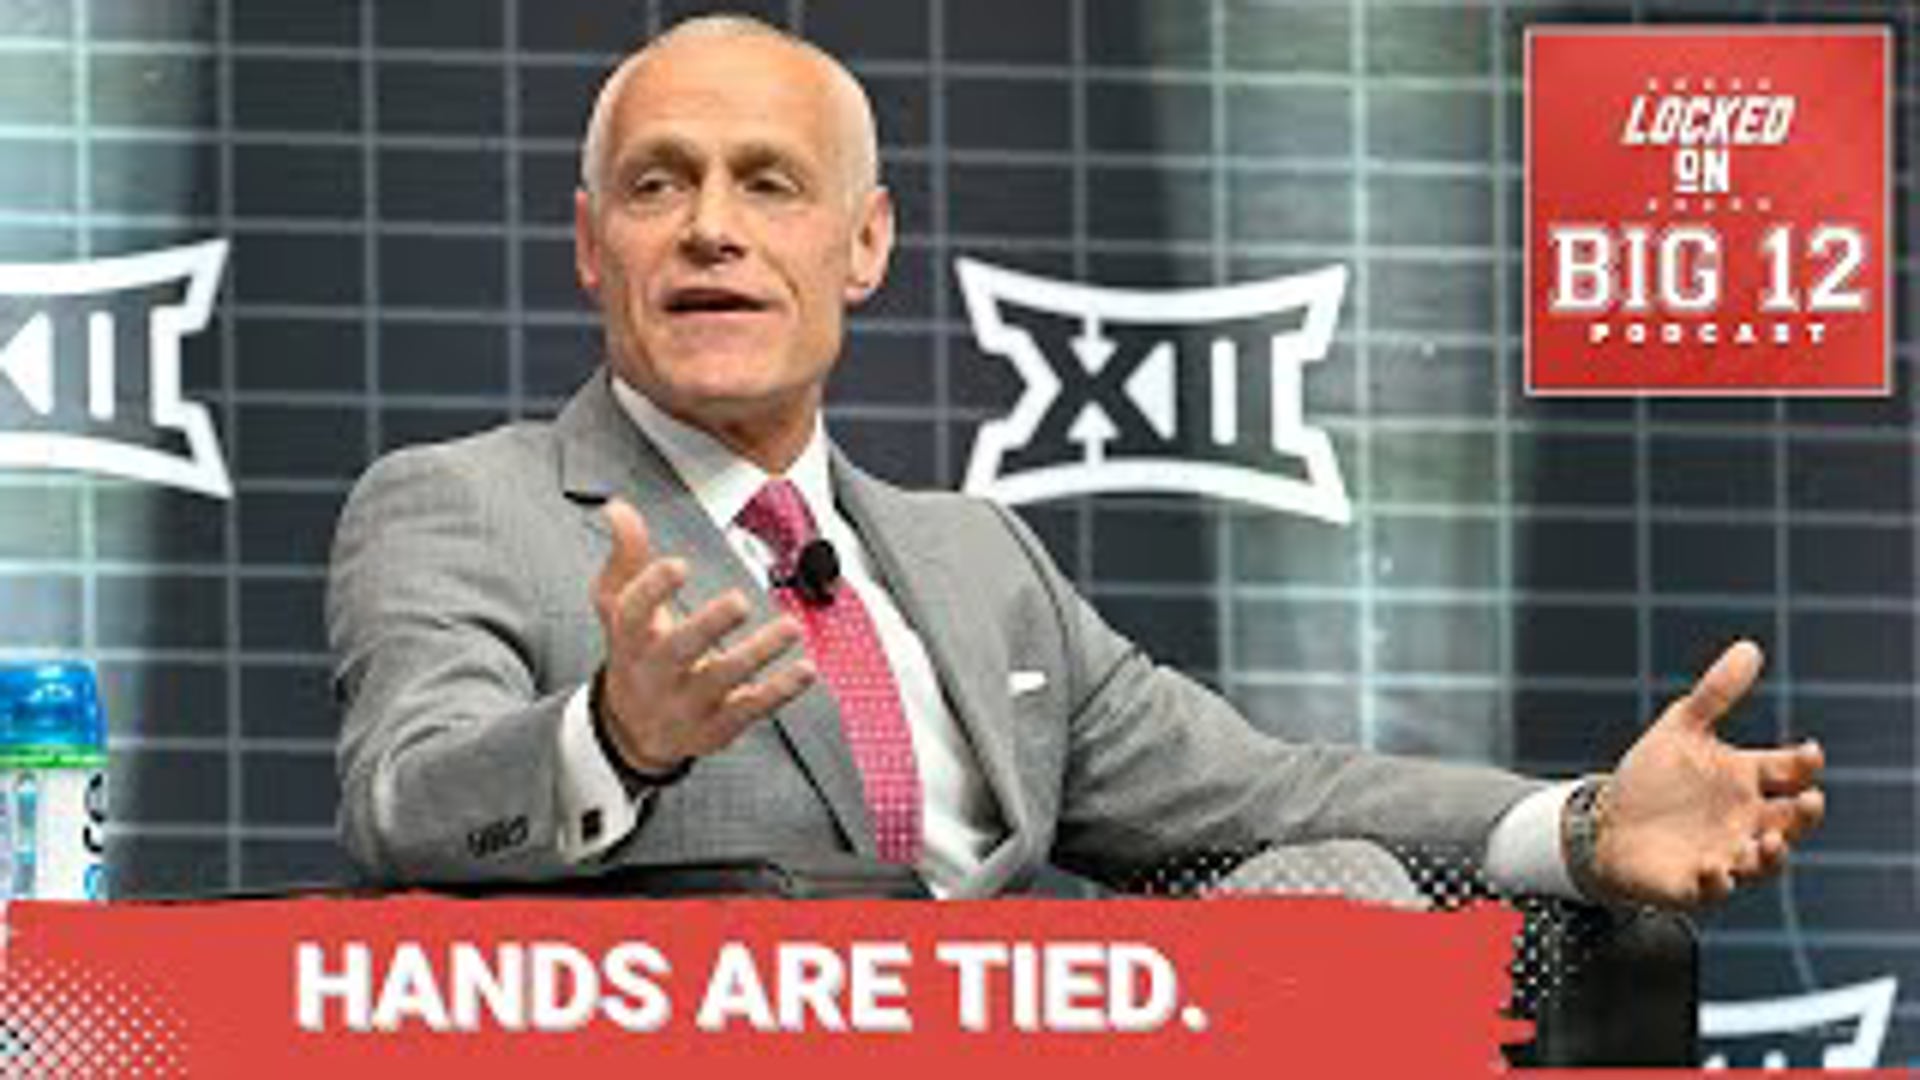 The NCAA is Now Trying to KILL the Expansion Big 12: Only SEC, Big 10 Remain as ACC Crumbles Too